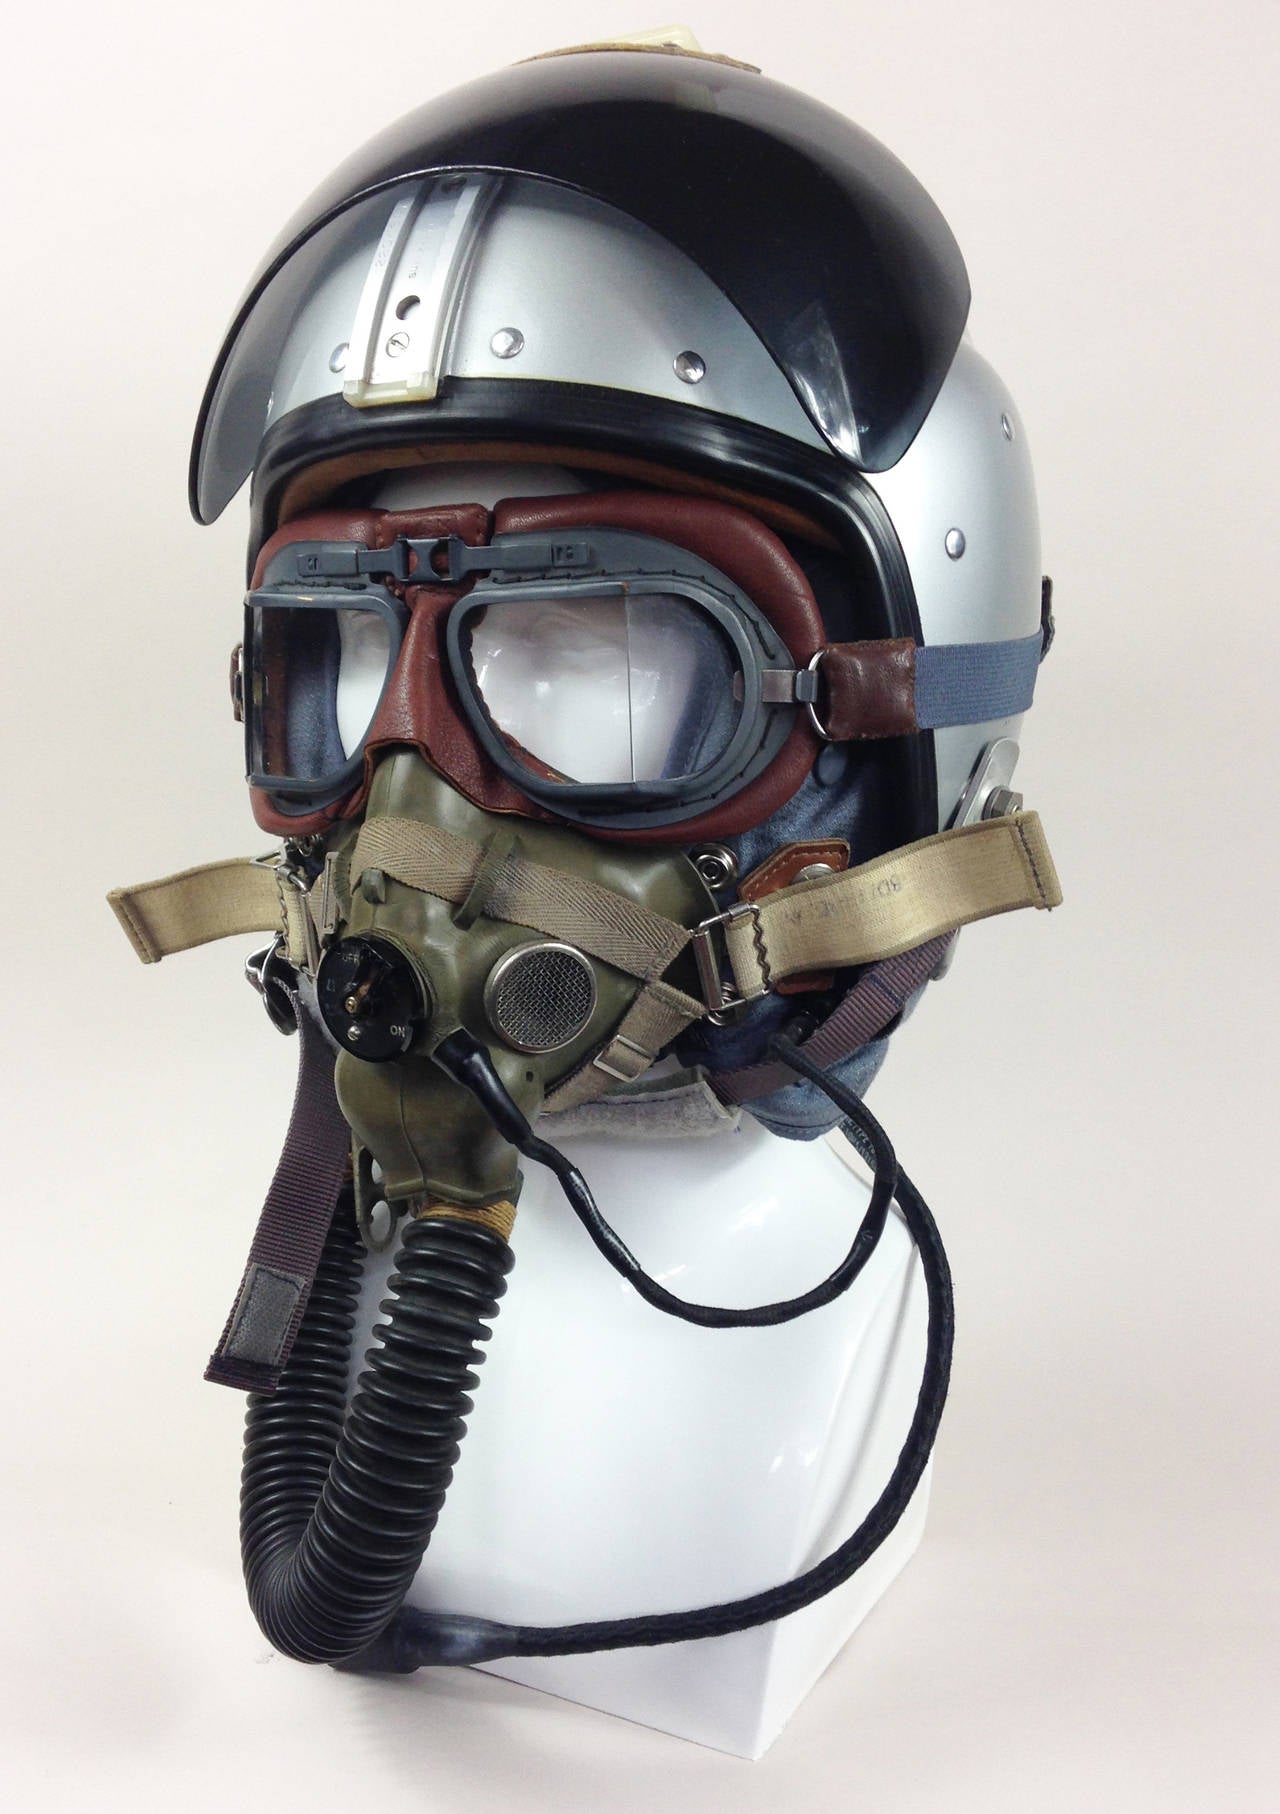 An extremely scarce, museum quality group of Royal Air Force pilot's headgear. 

Originating from the early years of the 'Jet Age' sets like this would have been worn in such iconic aircraft as the English Electric Lightning.

Consisting of a